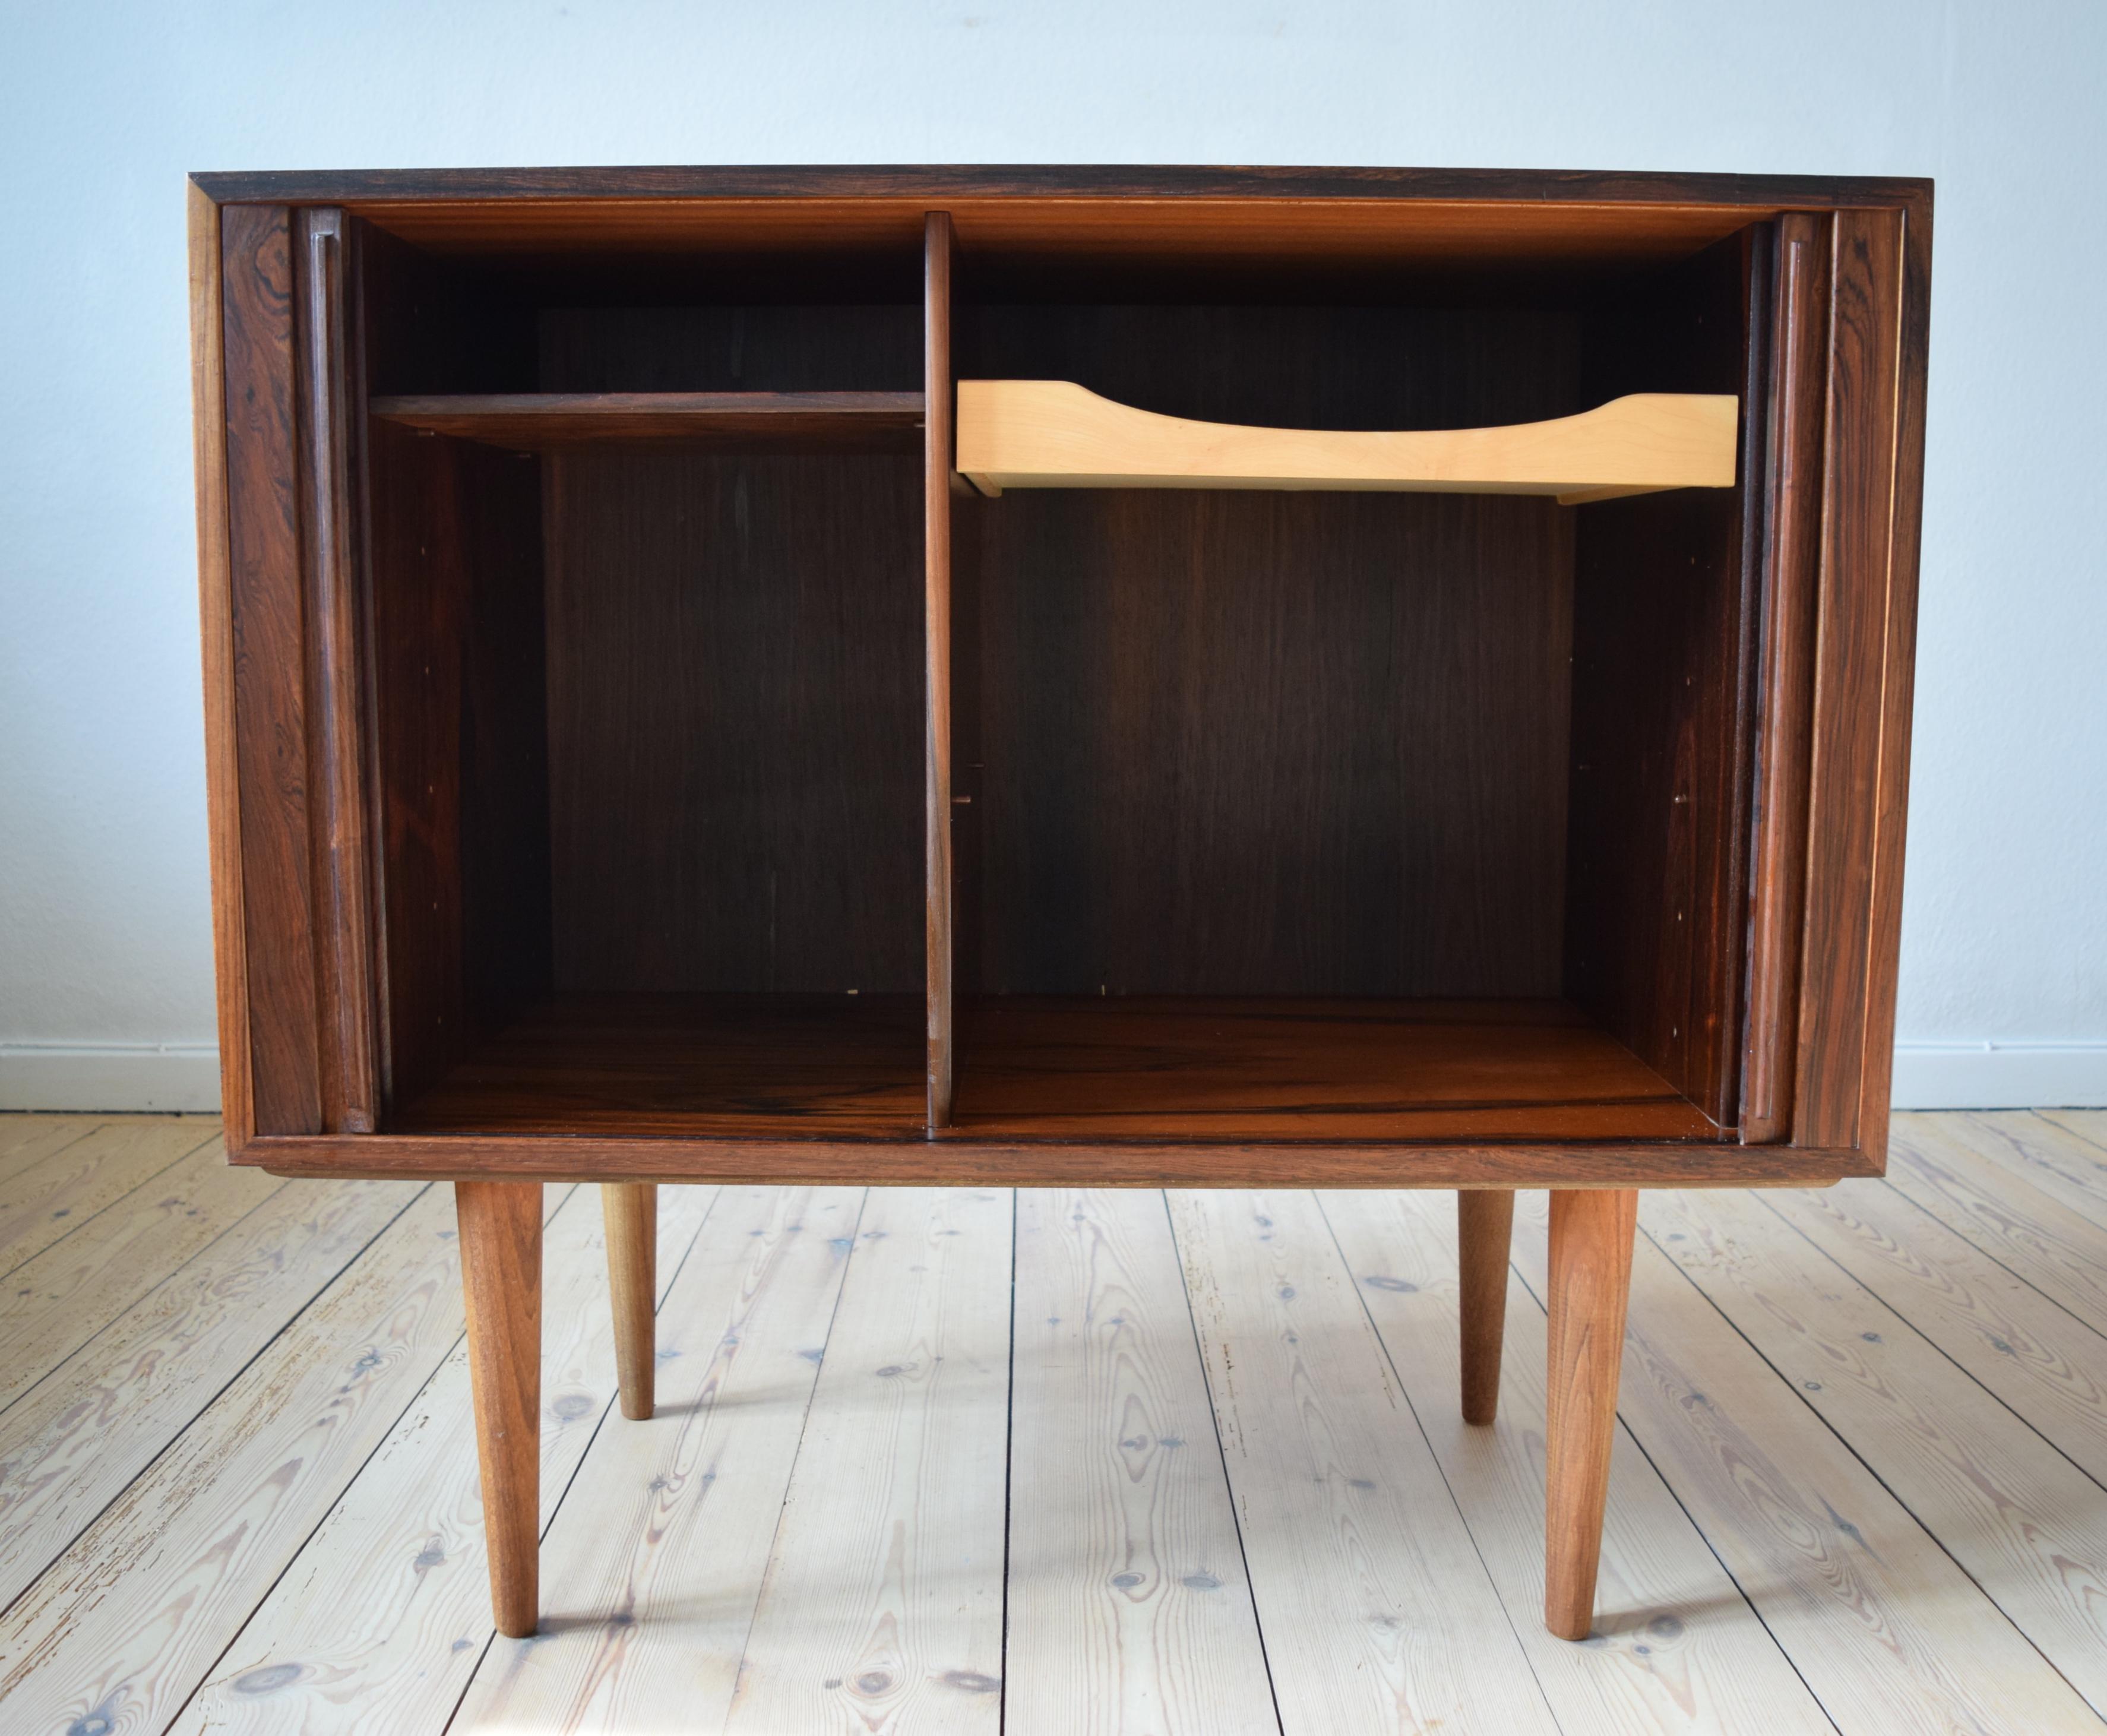 Danish rosewood cabinet by Kai Kristiansen for FM Møbler. Manufactured in the 1960s, this piece features two tambour doors with internal compartment with shelf on the left side and felt lined maple drawer on the right side. Striking rosewood grain